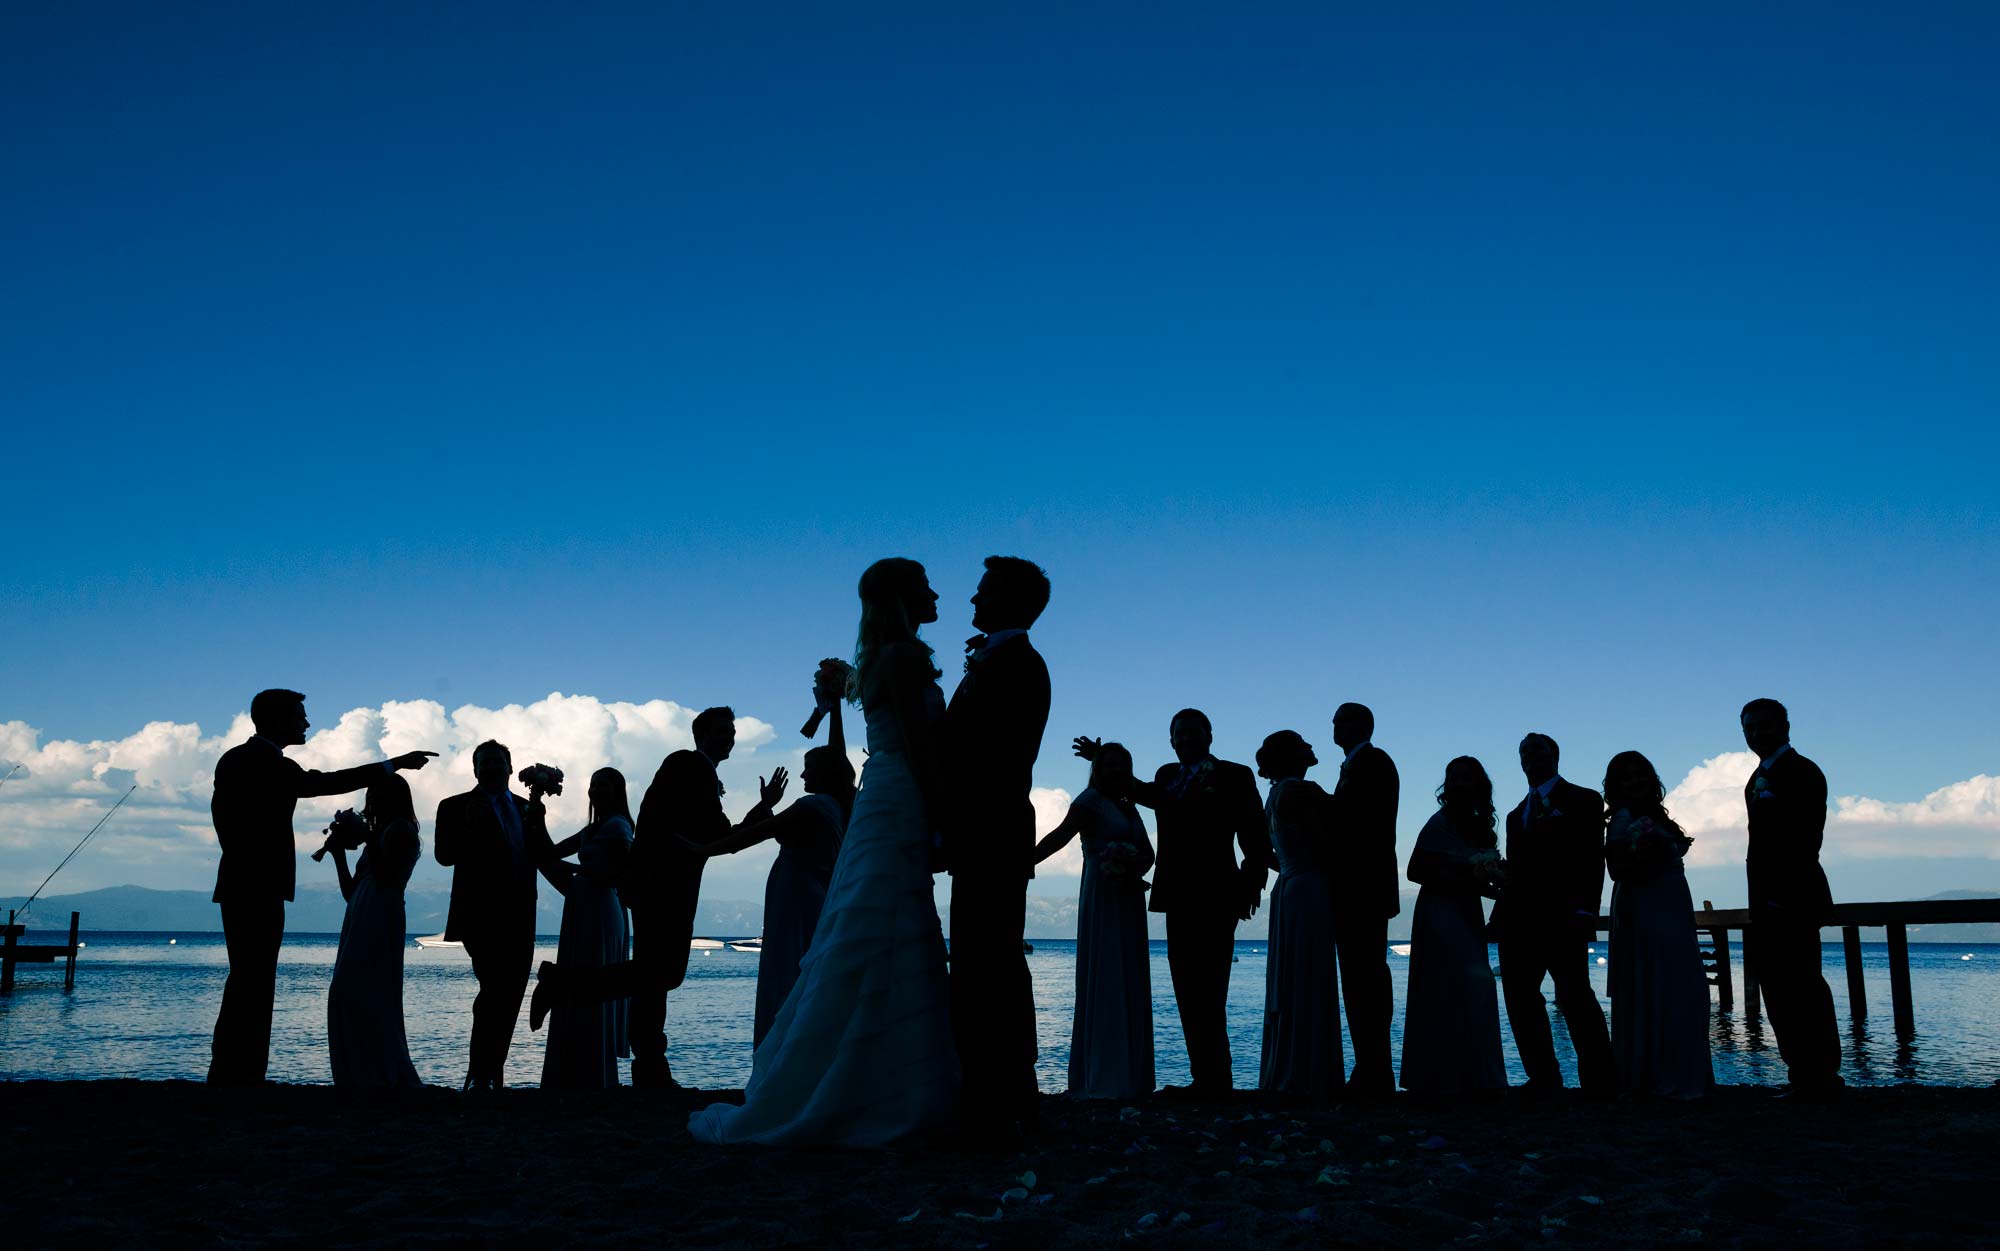 Photograph of silhouetted wedding party on the shore of Lake Tahoe during a Lake Tahoe private estate wedding. Photography by Monique, Lake Tahoe wedding photographer.